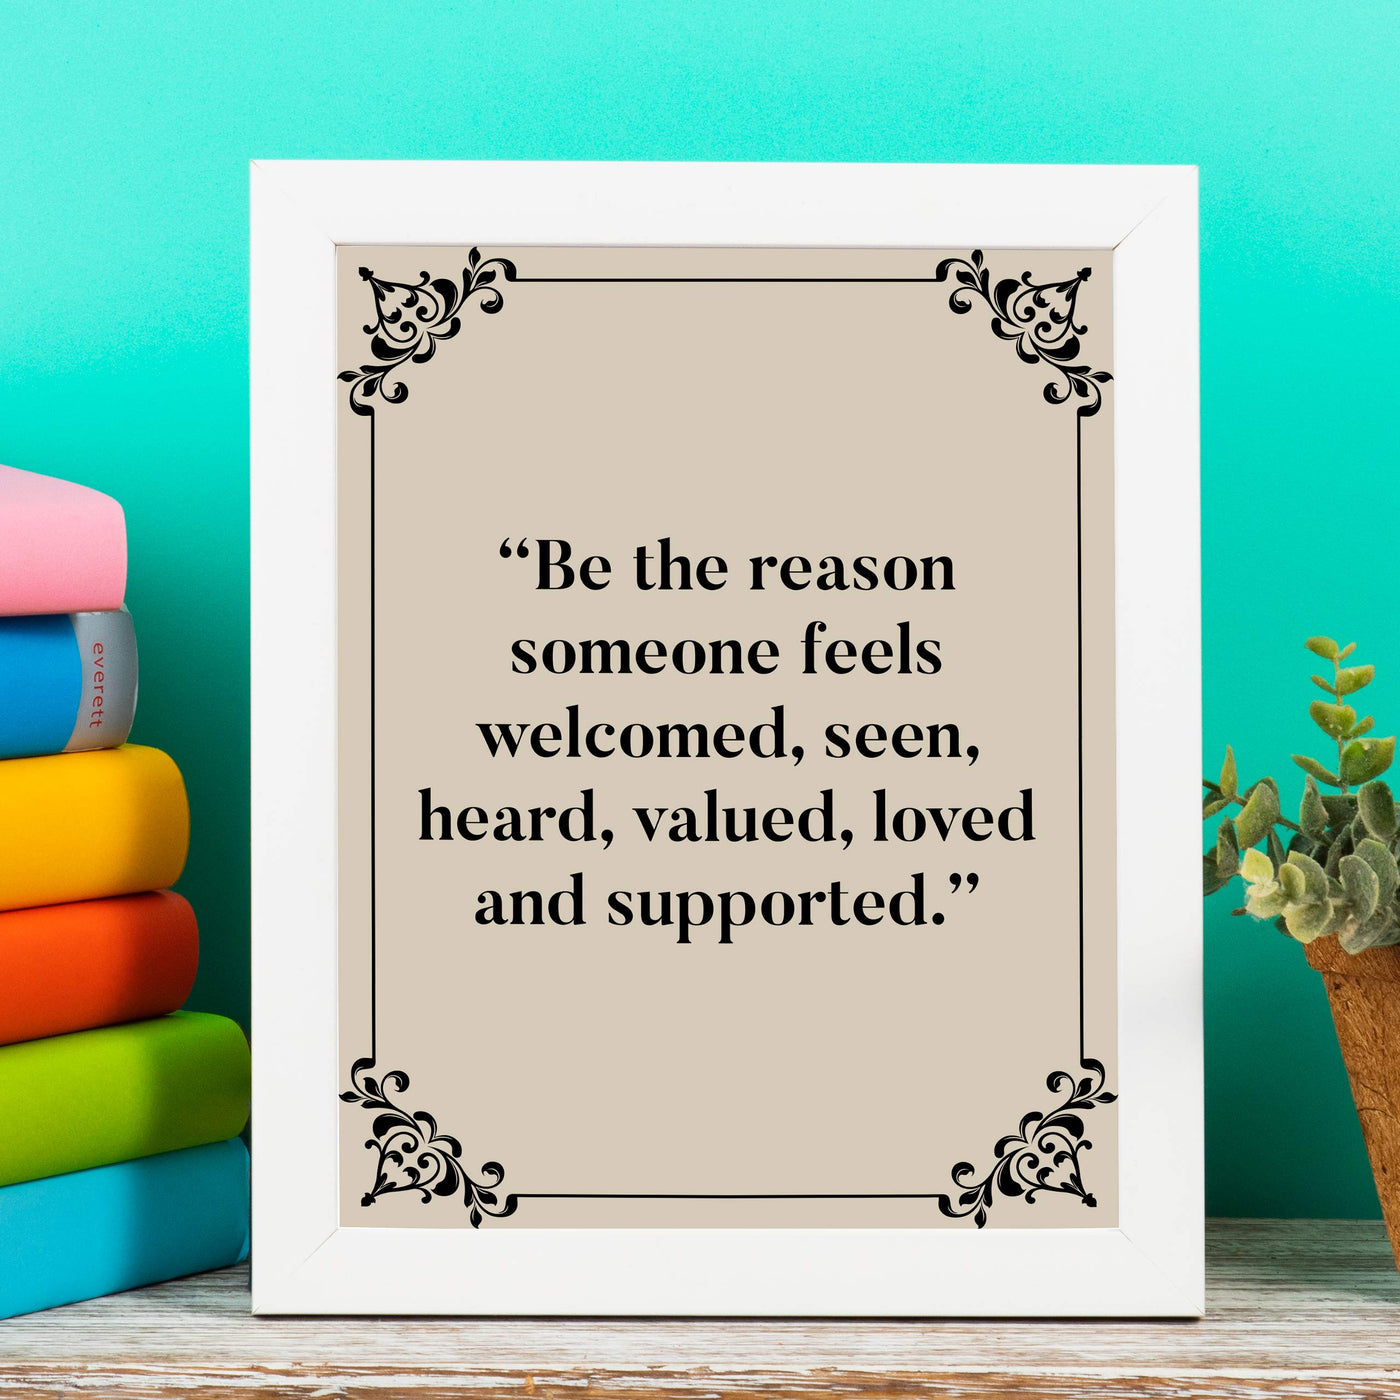 ?Be the Reason Someone Feels Loved & Supported?-Inspirational Wall Art -8 x 10" Typographic Poster Print-Ready to Frame. Motivational Home-Office-Classroom Decor. Perfect Sign for Teachers! Be Kind!